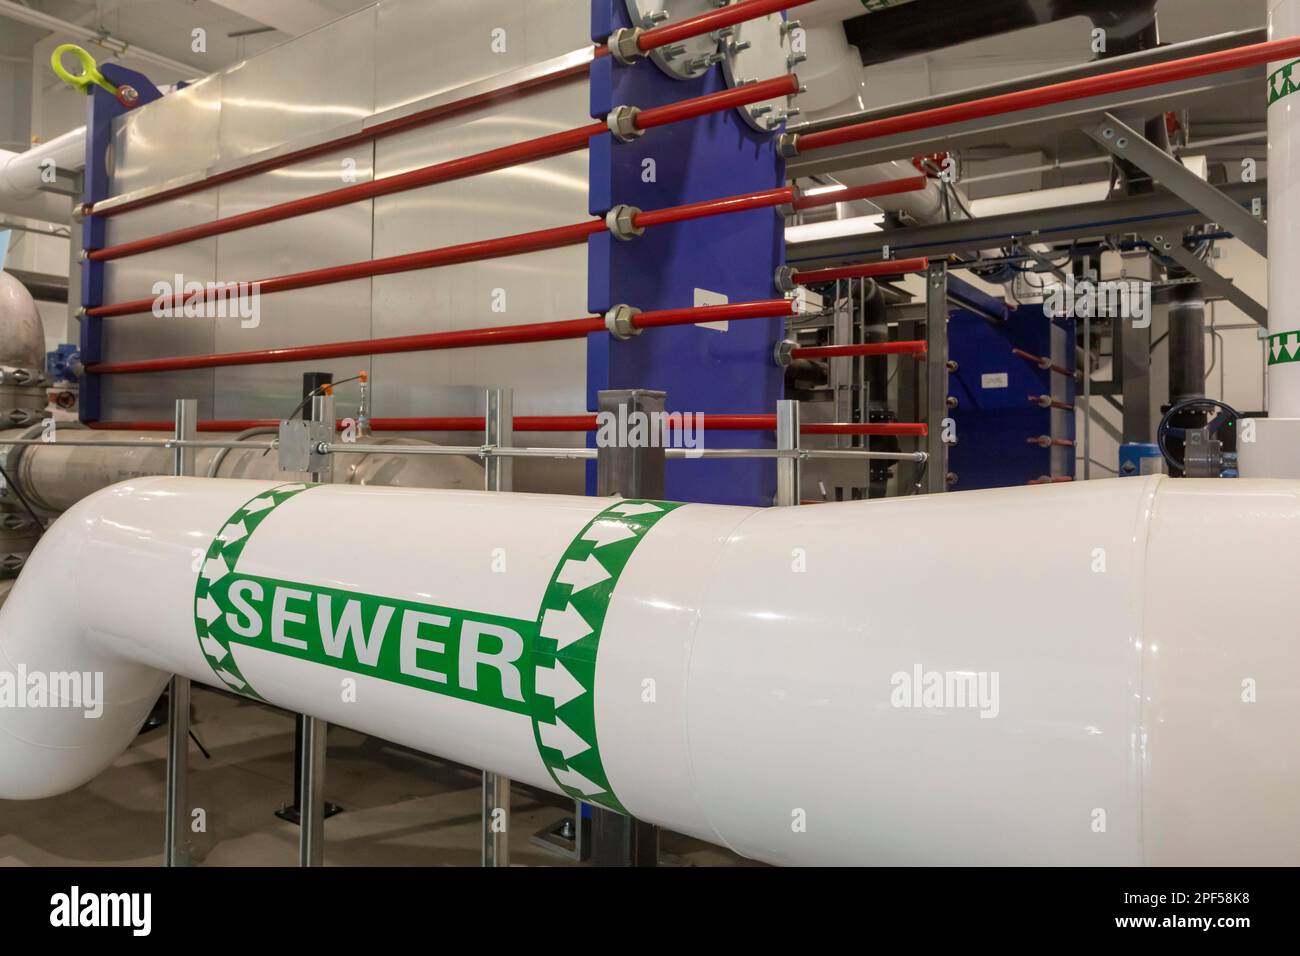 Denver, Colorado, Raw sewage is used to heat and cool buildings at the National Western Center and the Colorado State University Spur campus. The Stock Photo